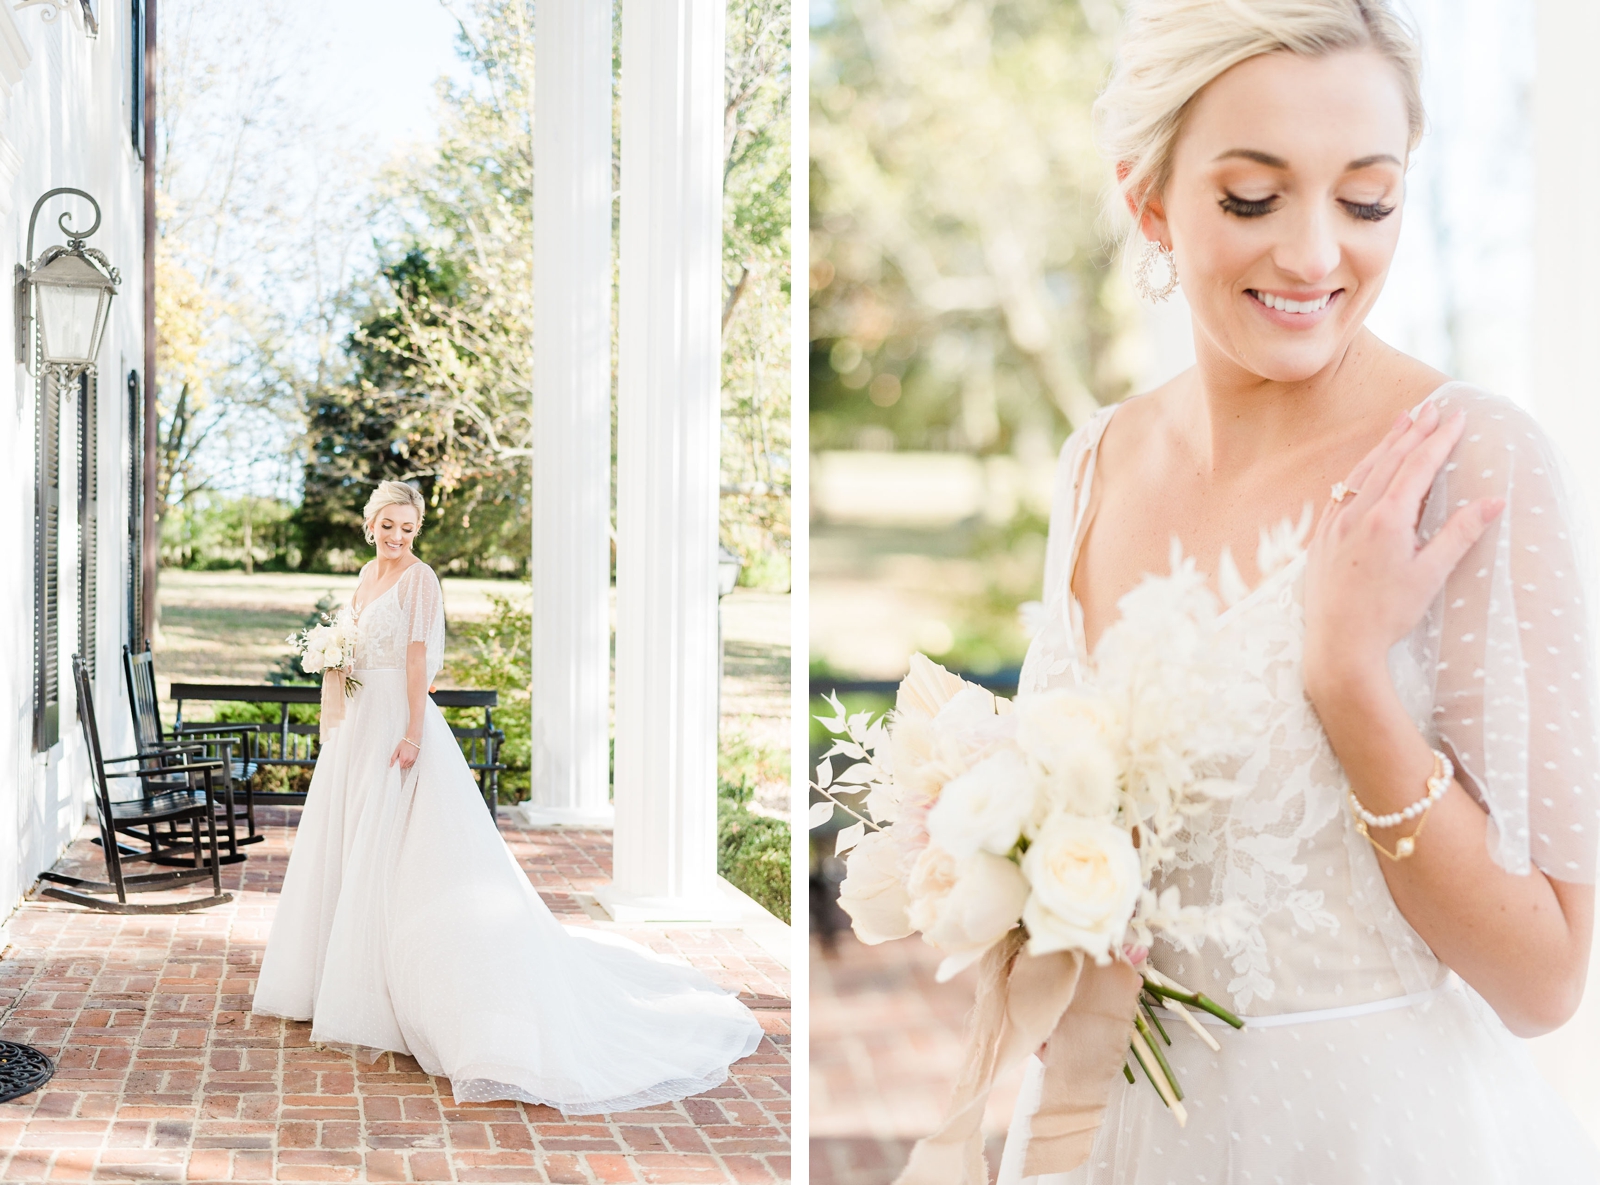 Bride in Nikki by Blush by Hayley Paige - From Hyde Park Bridal